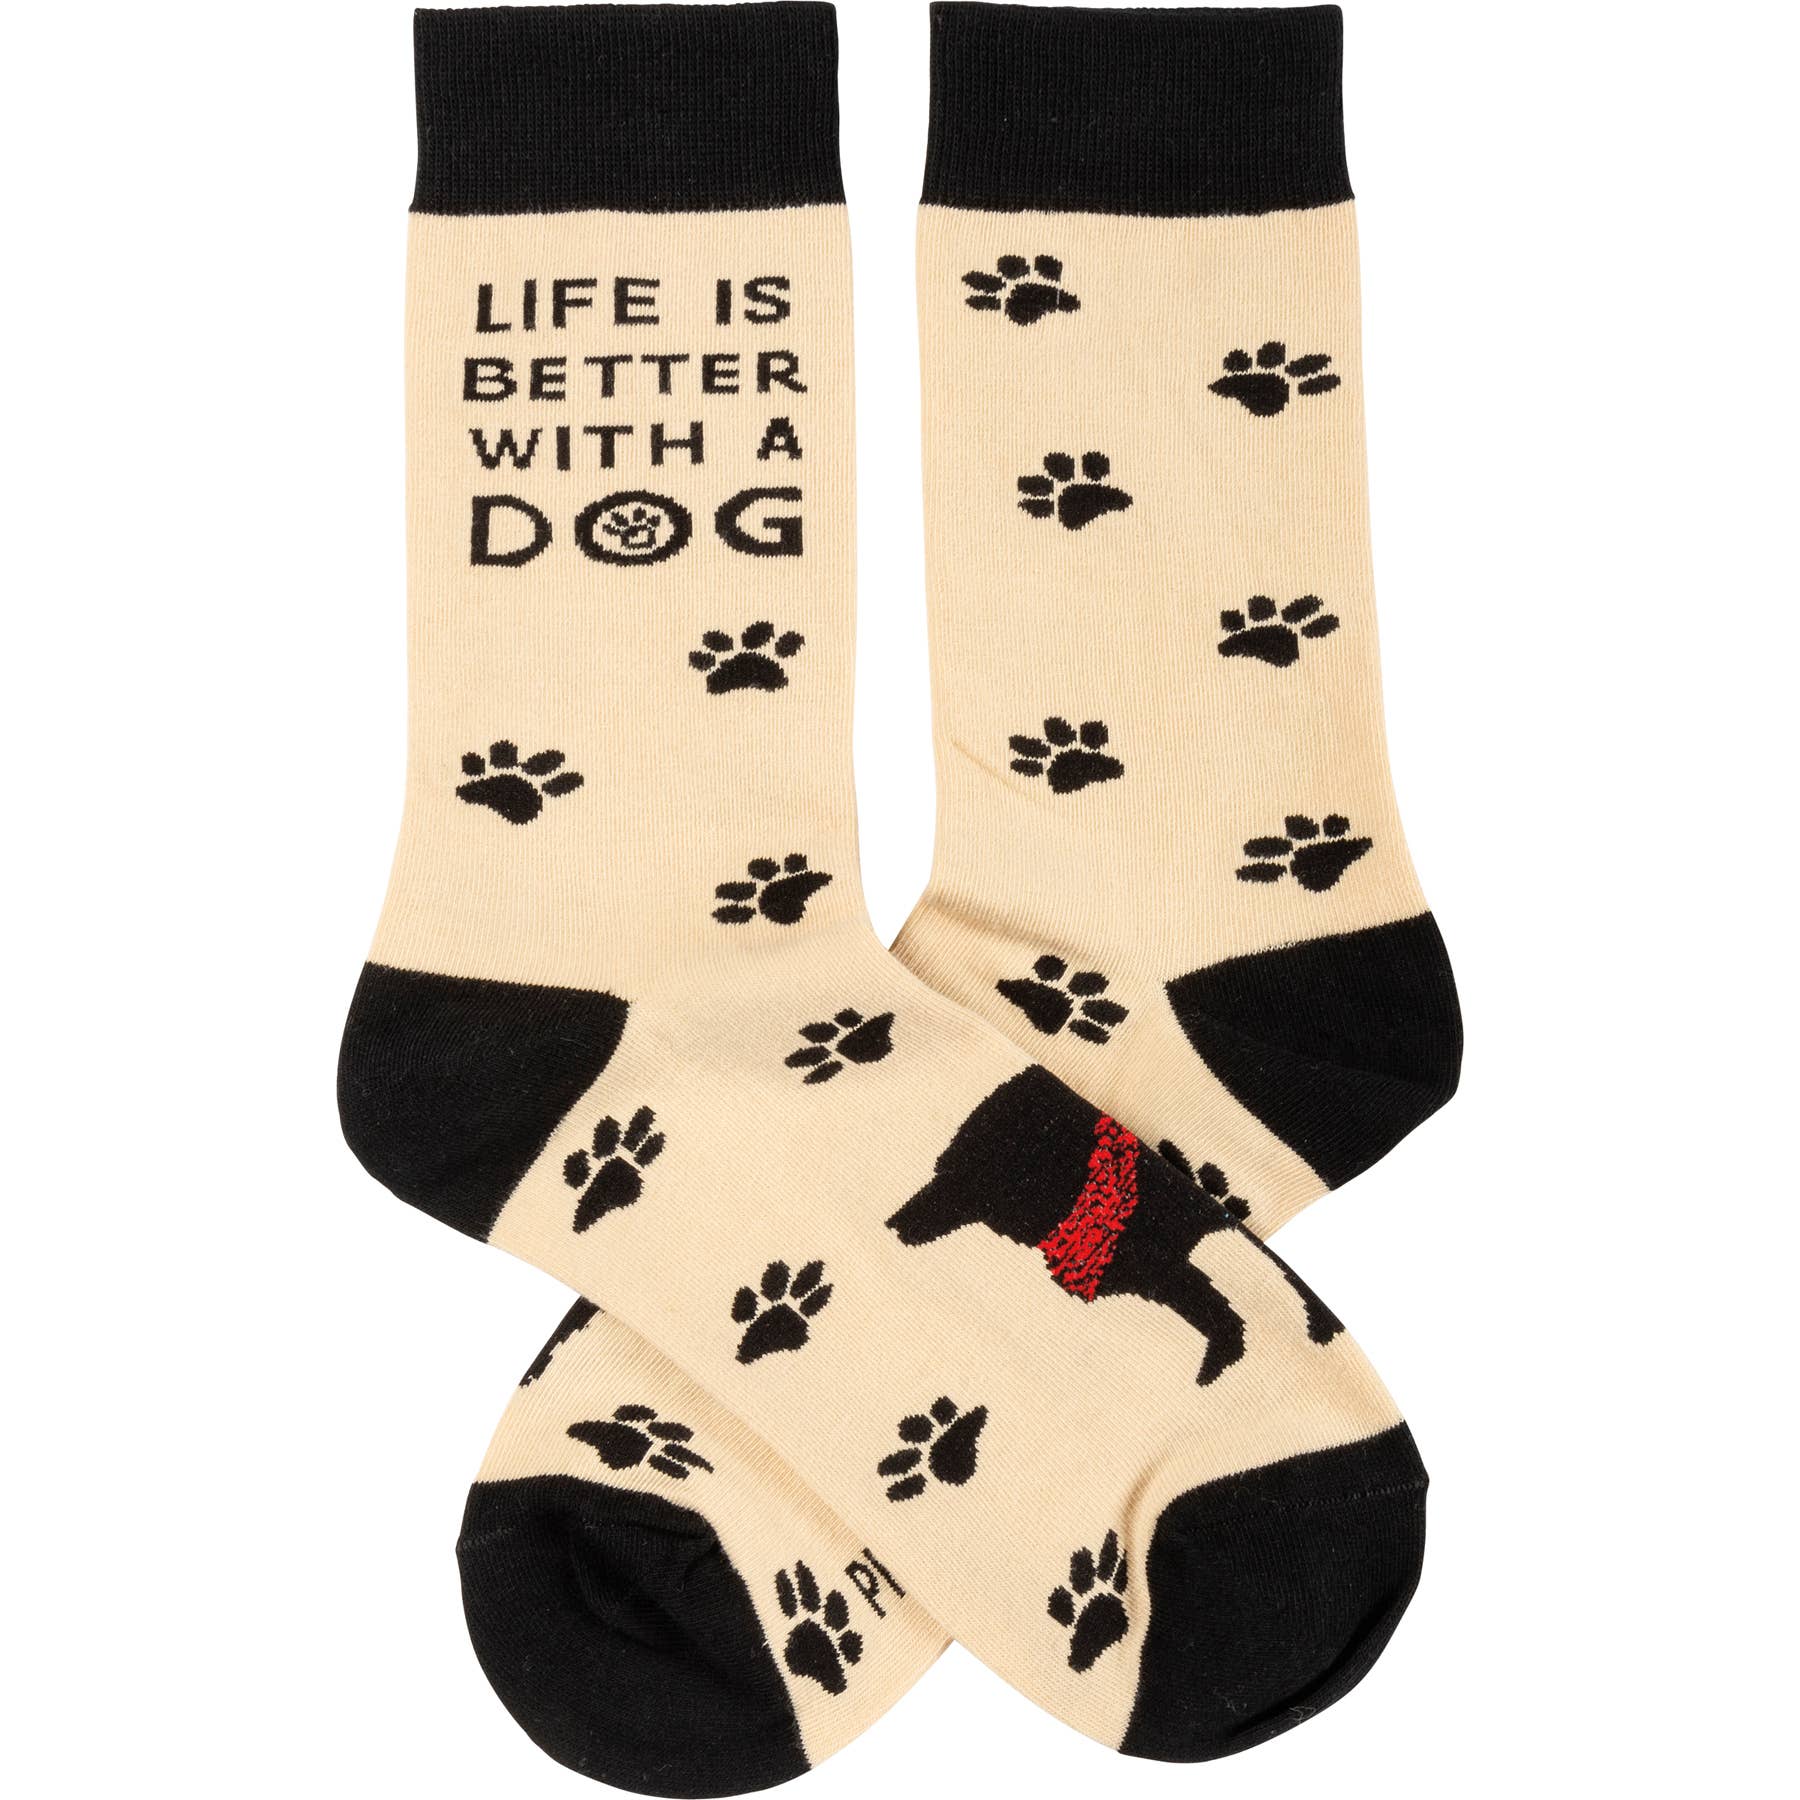 Life Is Better With A Dog Socks